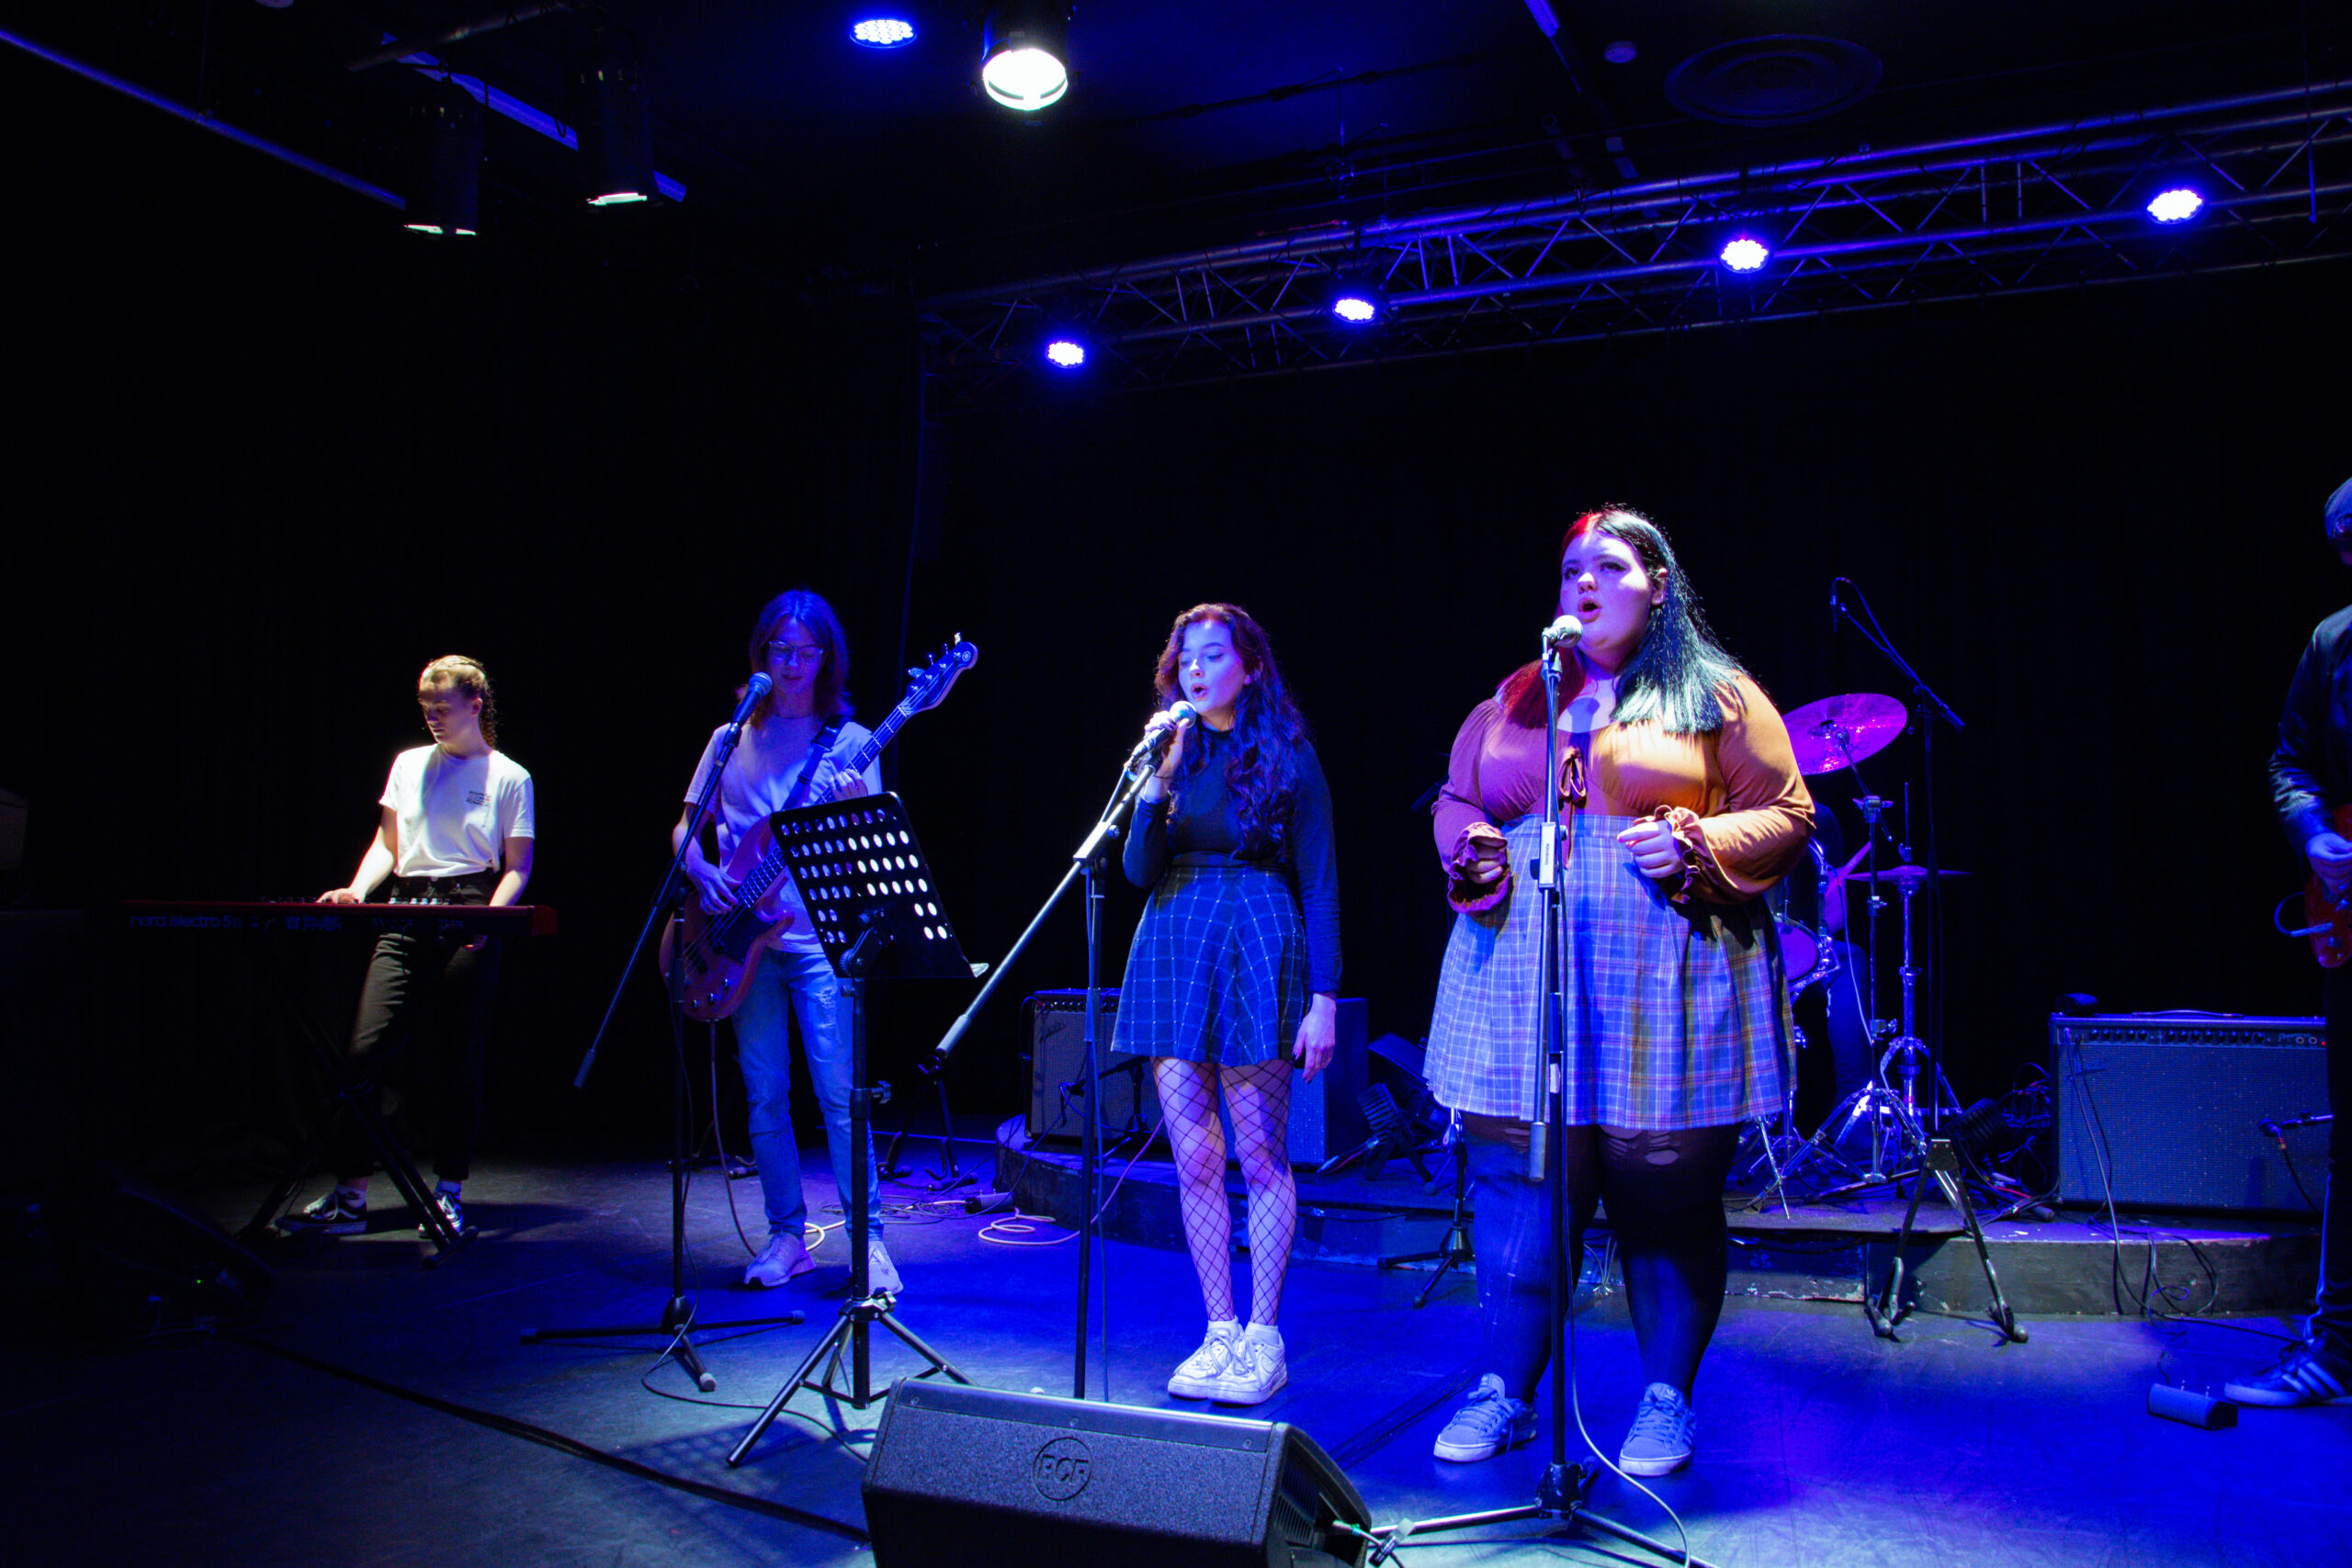 a student band performing at a music performance